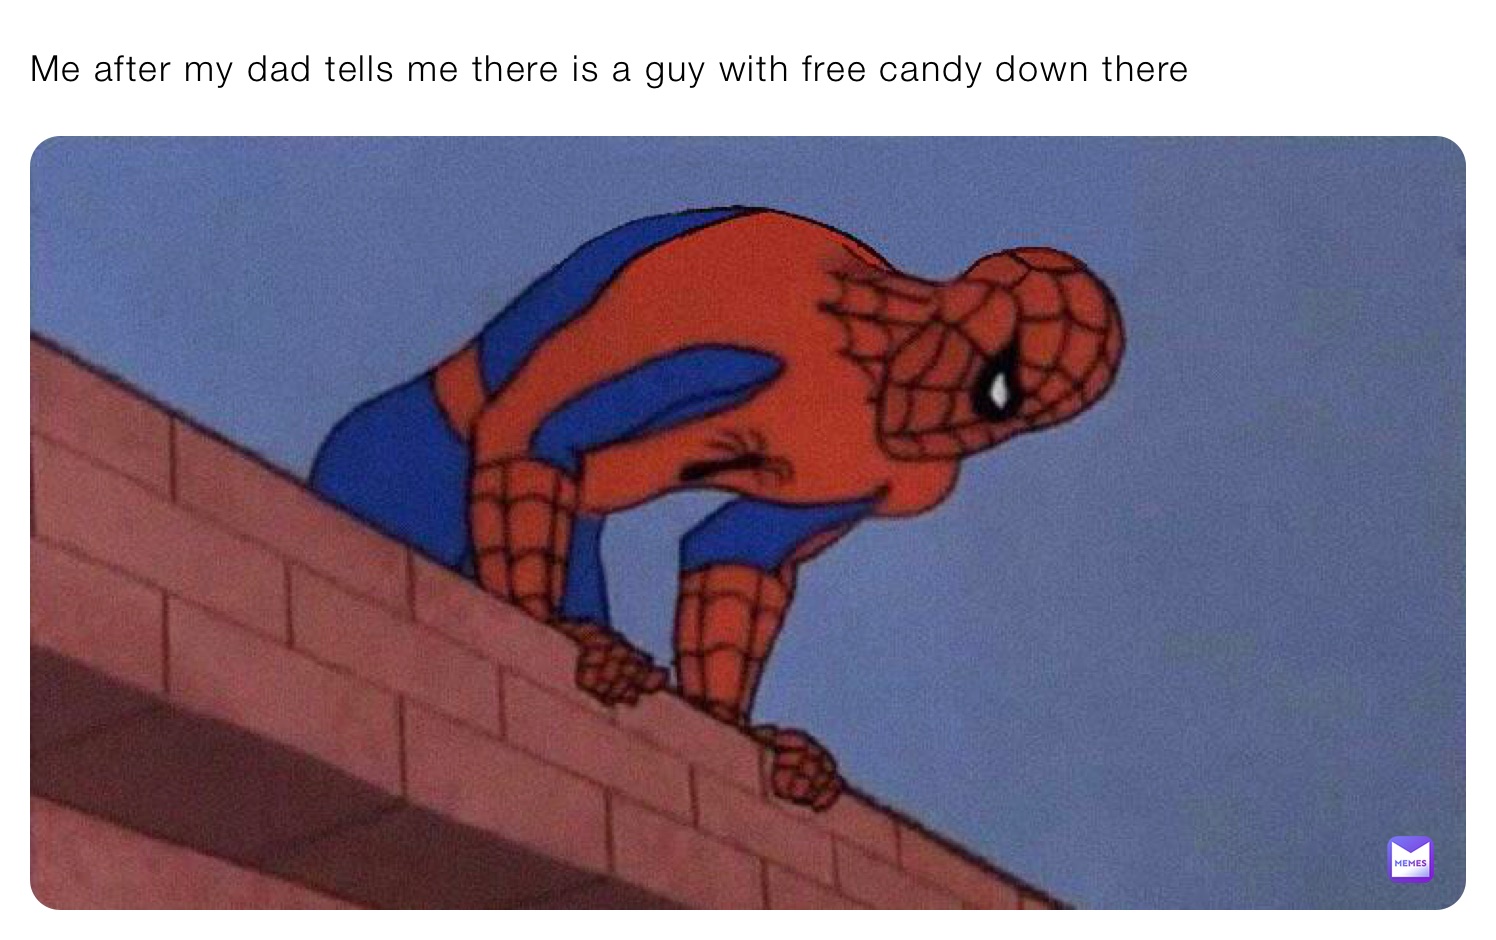 Me after my dad tells me there is a guy with free candy down there